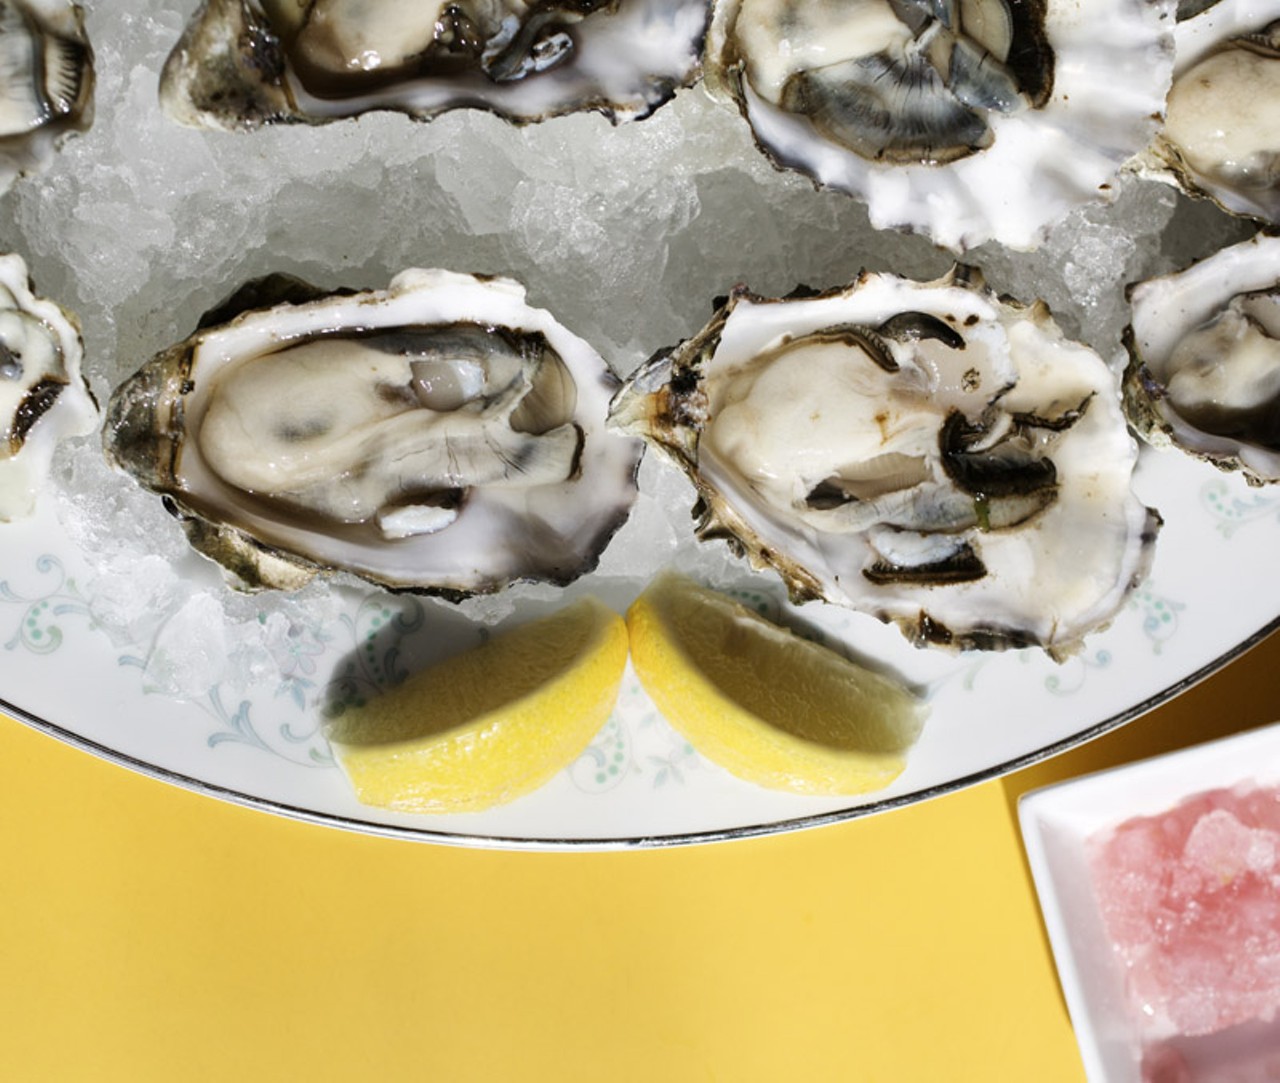 Fresh Oysters imported daily.